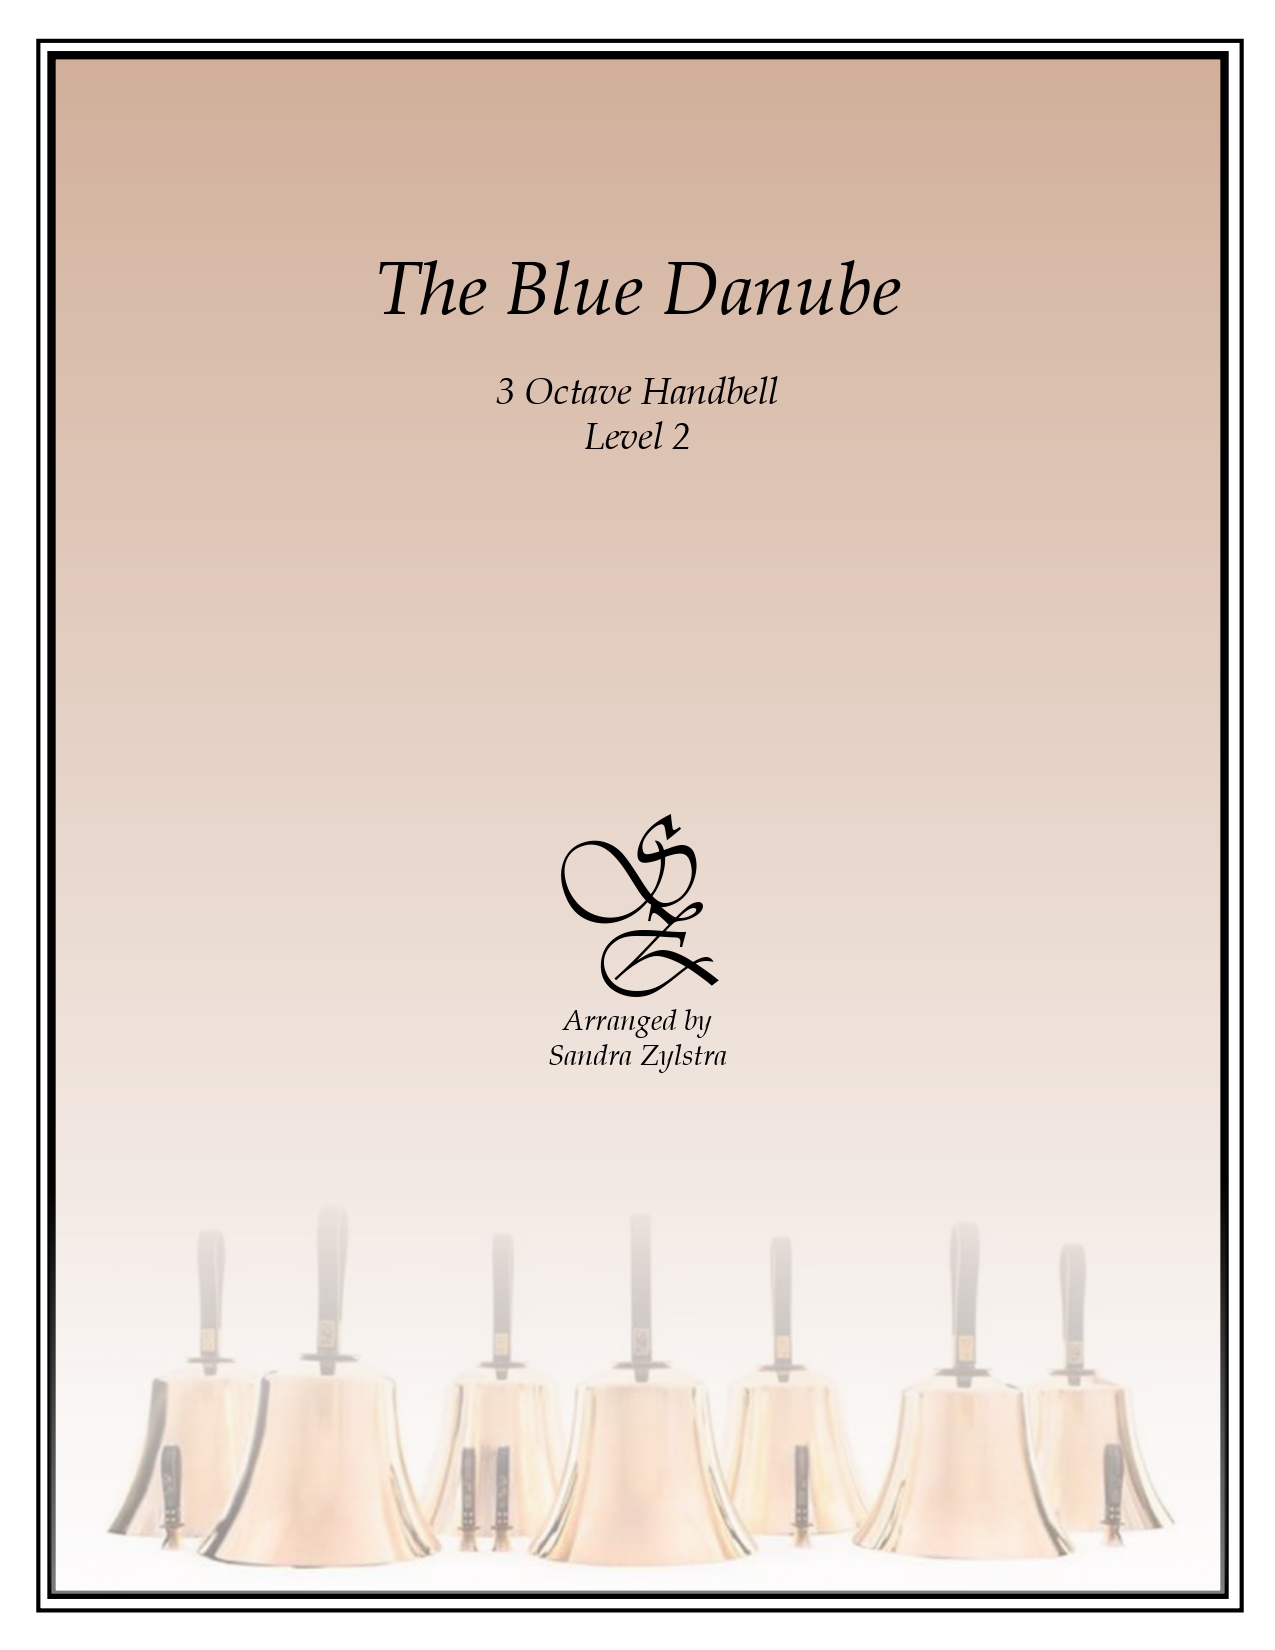 The Blue Danube 3 octave handbells cover page 00011